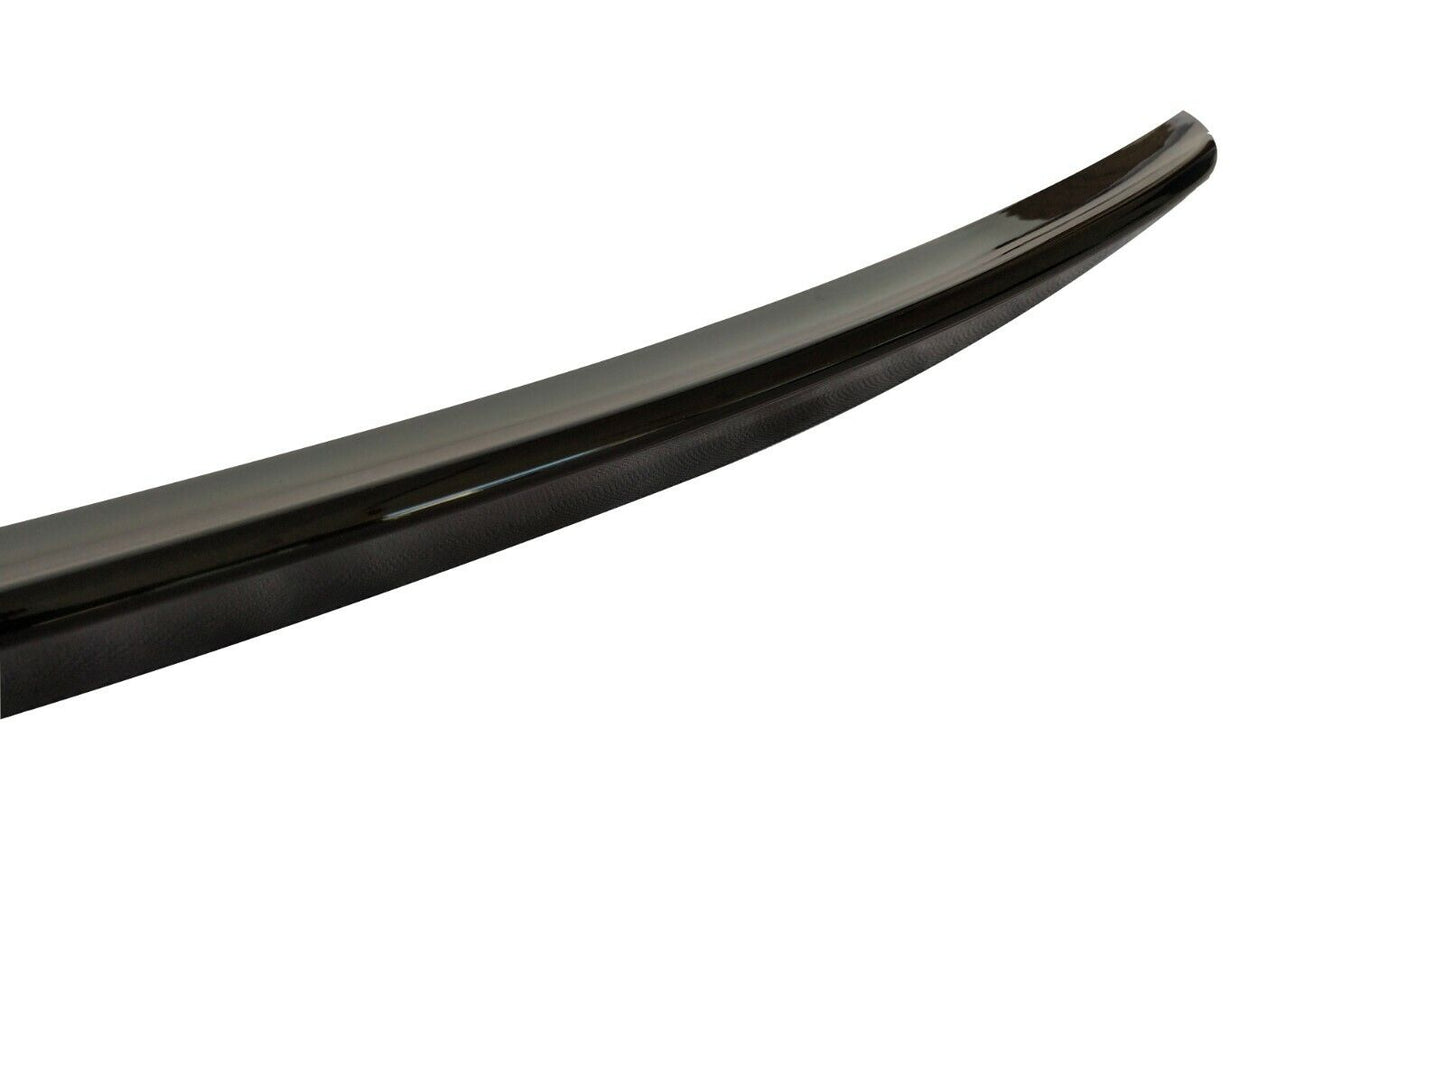 MERCEDES GLC C253 COUPE AMG STYLE REAR TRUNK BOOT SPOILER LIP GLOSS BLACK COLOR